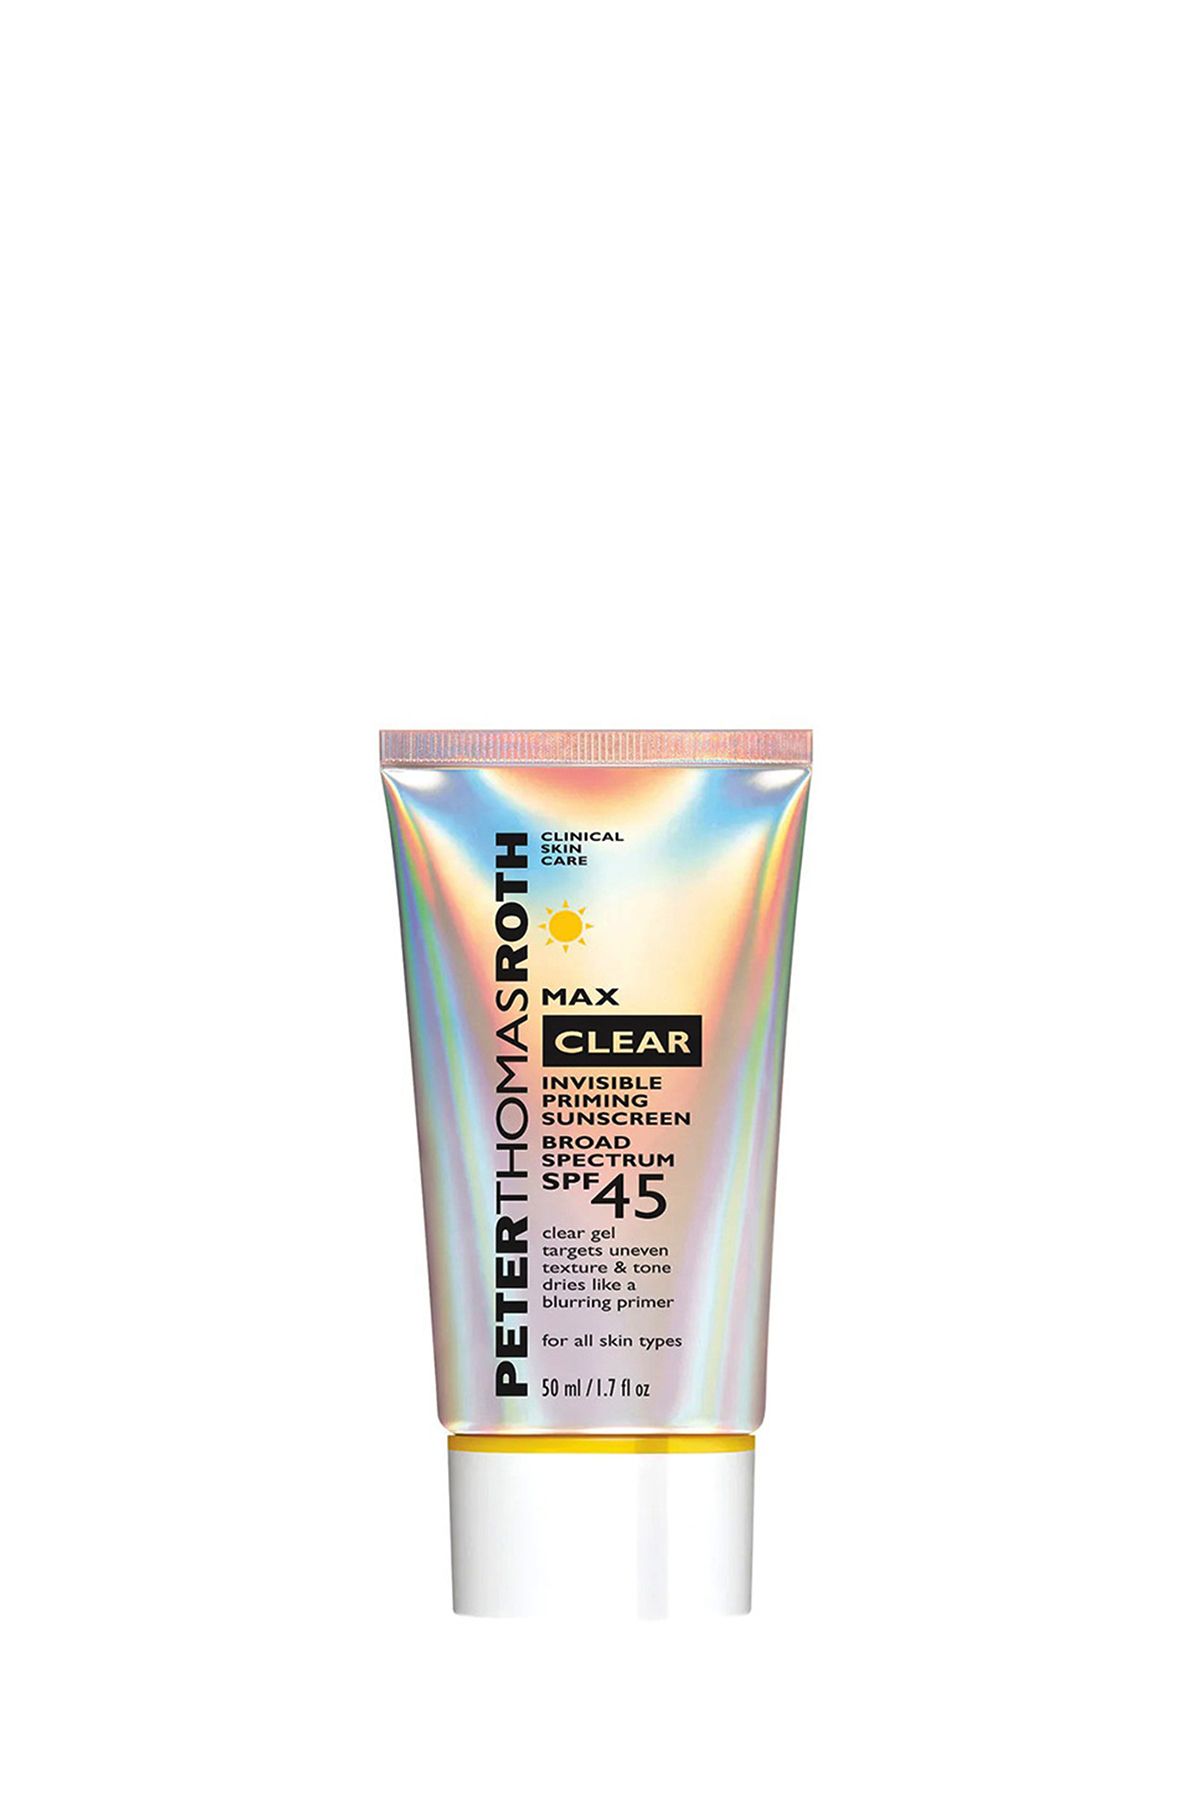 PETER THOMAS ROTH Max Clear Invisible Priming Sunscreen Broad Spectrum SPF 45 50 ml